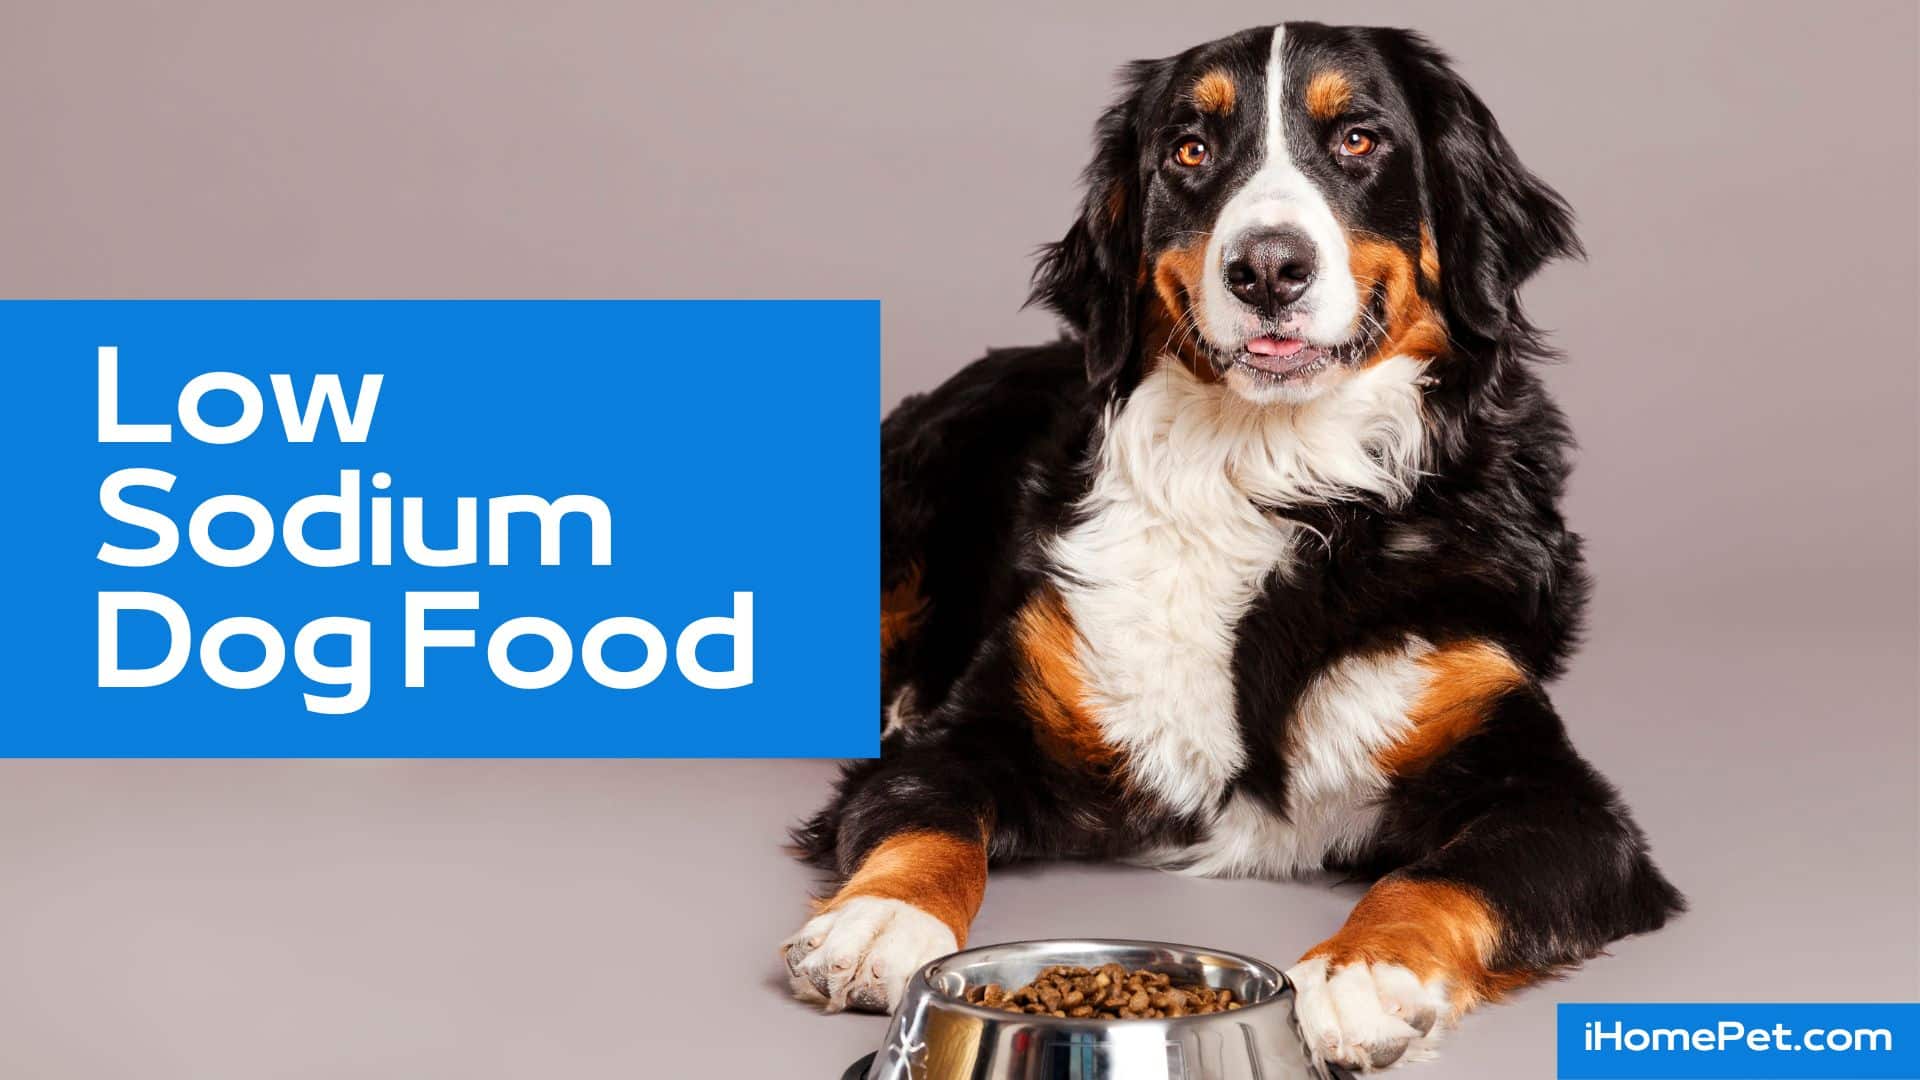 How much sodium does your pup need